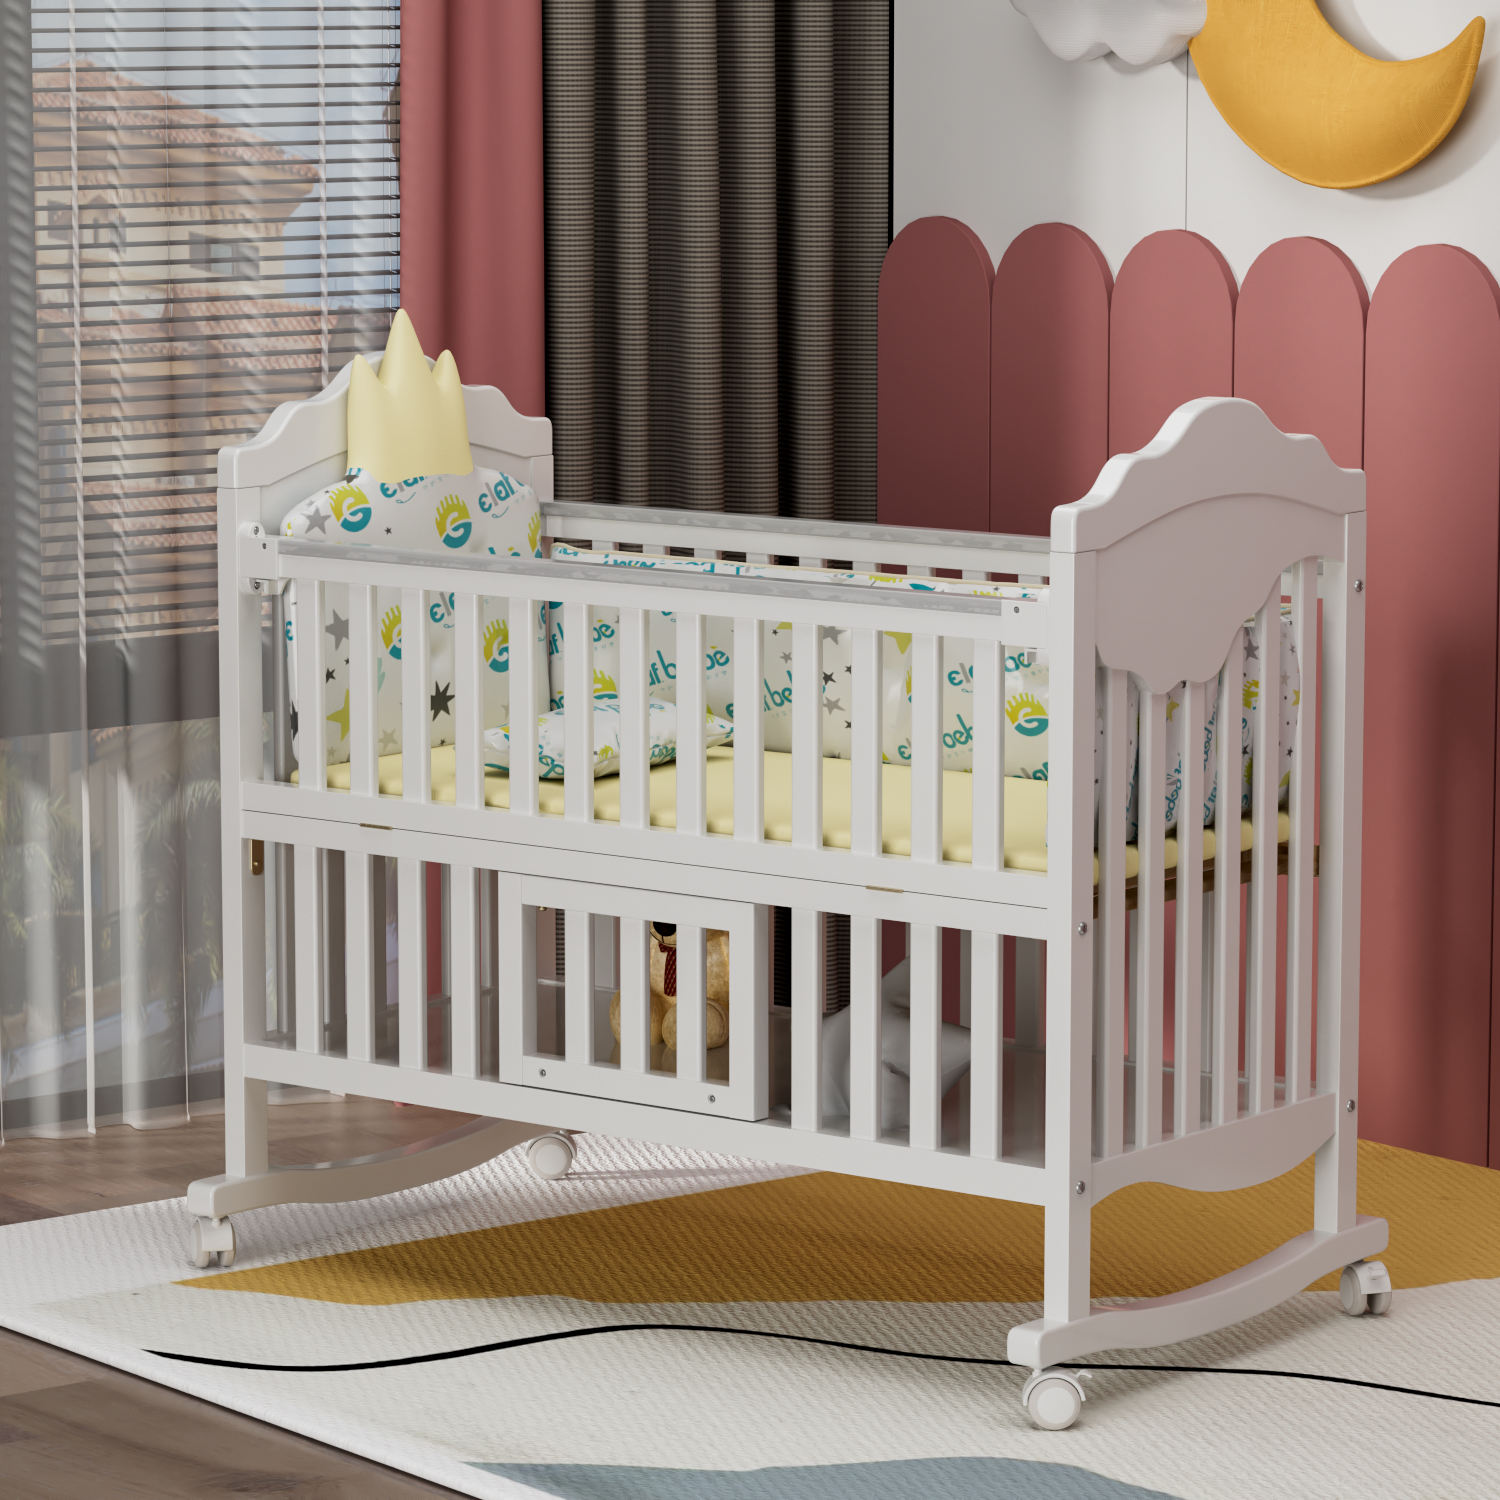 New High Quality Safe Wooden Baby Crib-01